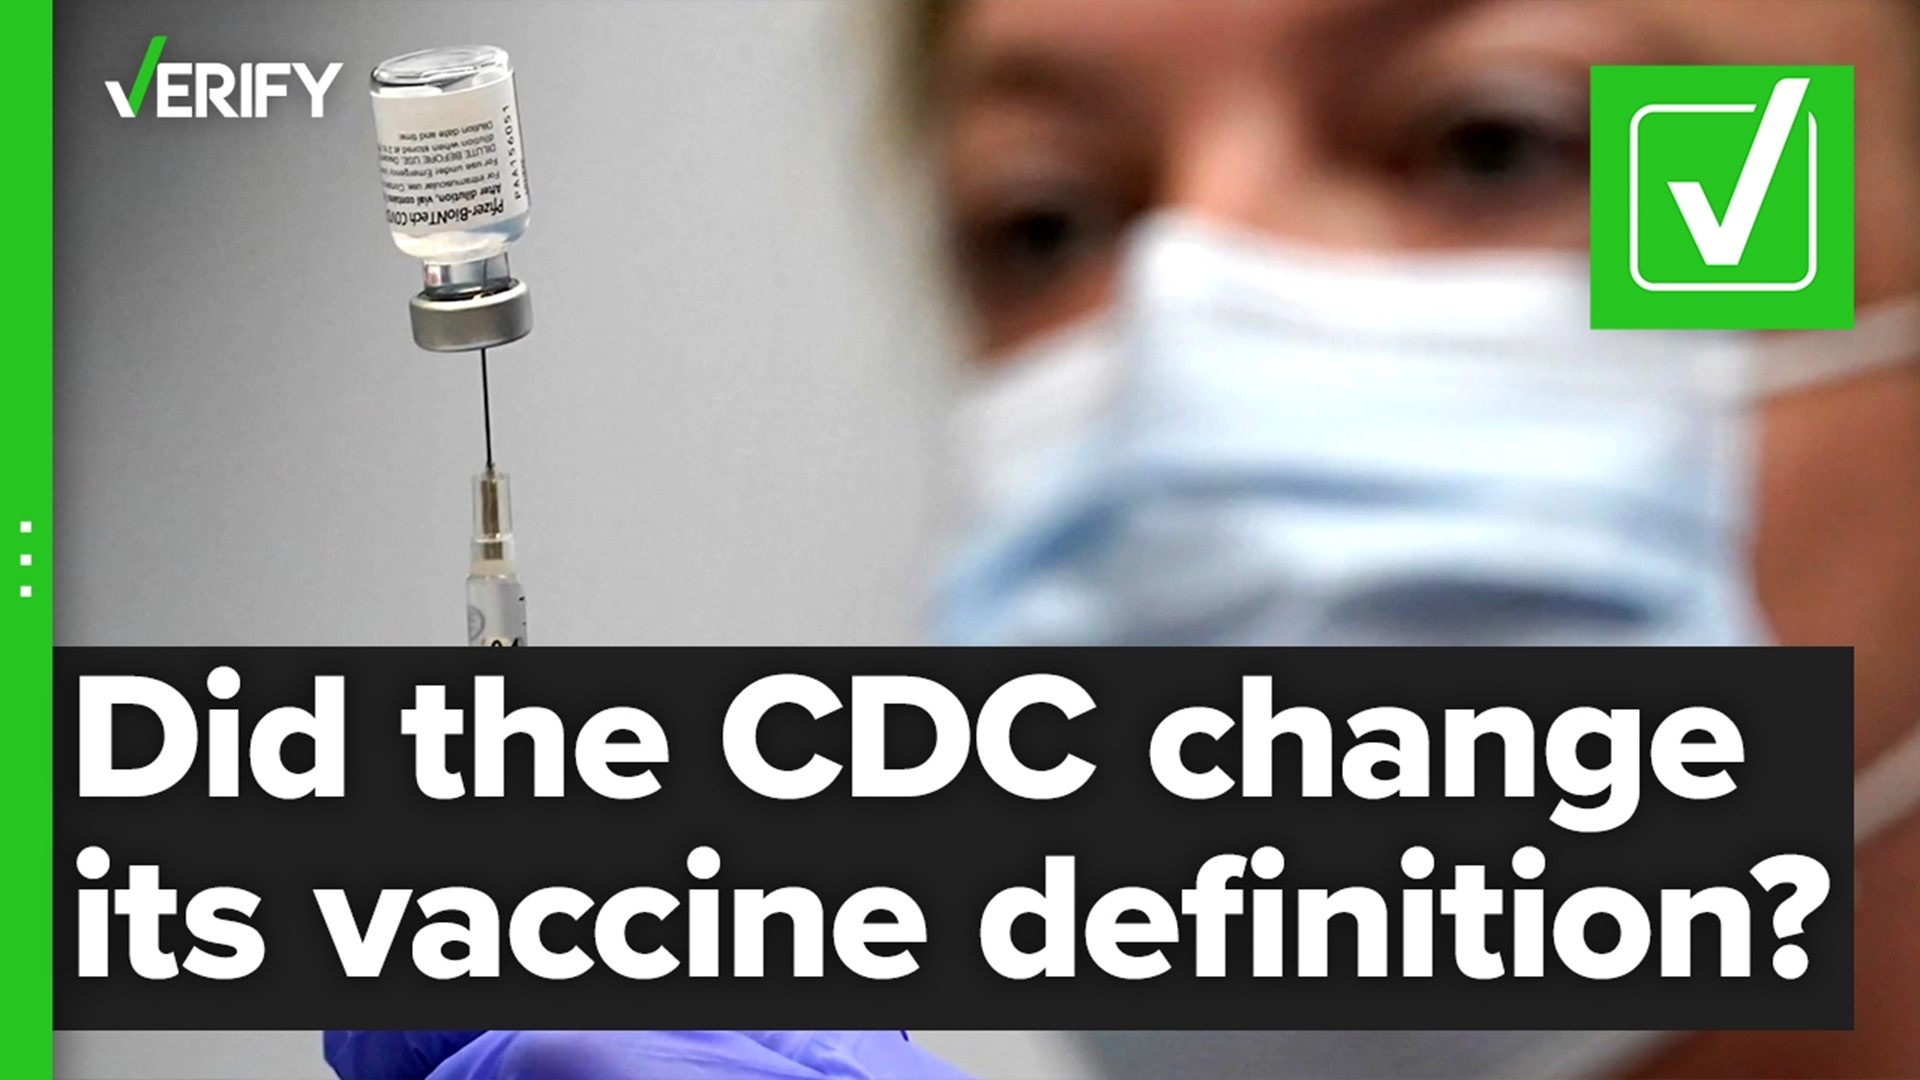 Did the CDC change its definition of vaccine? The VERIFY team confirms this is true.